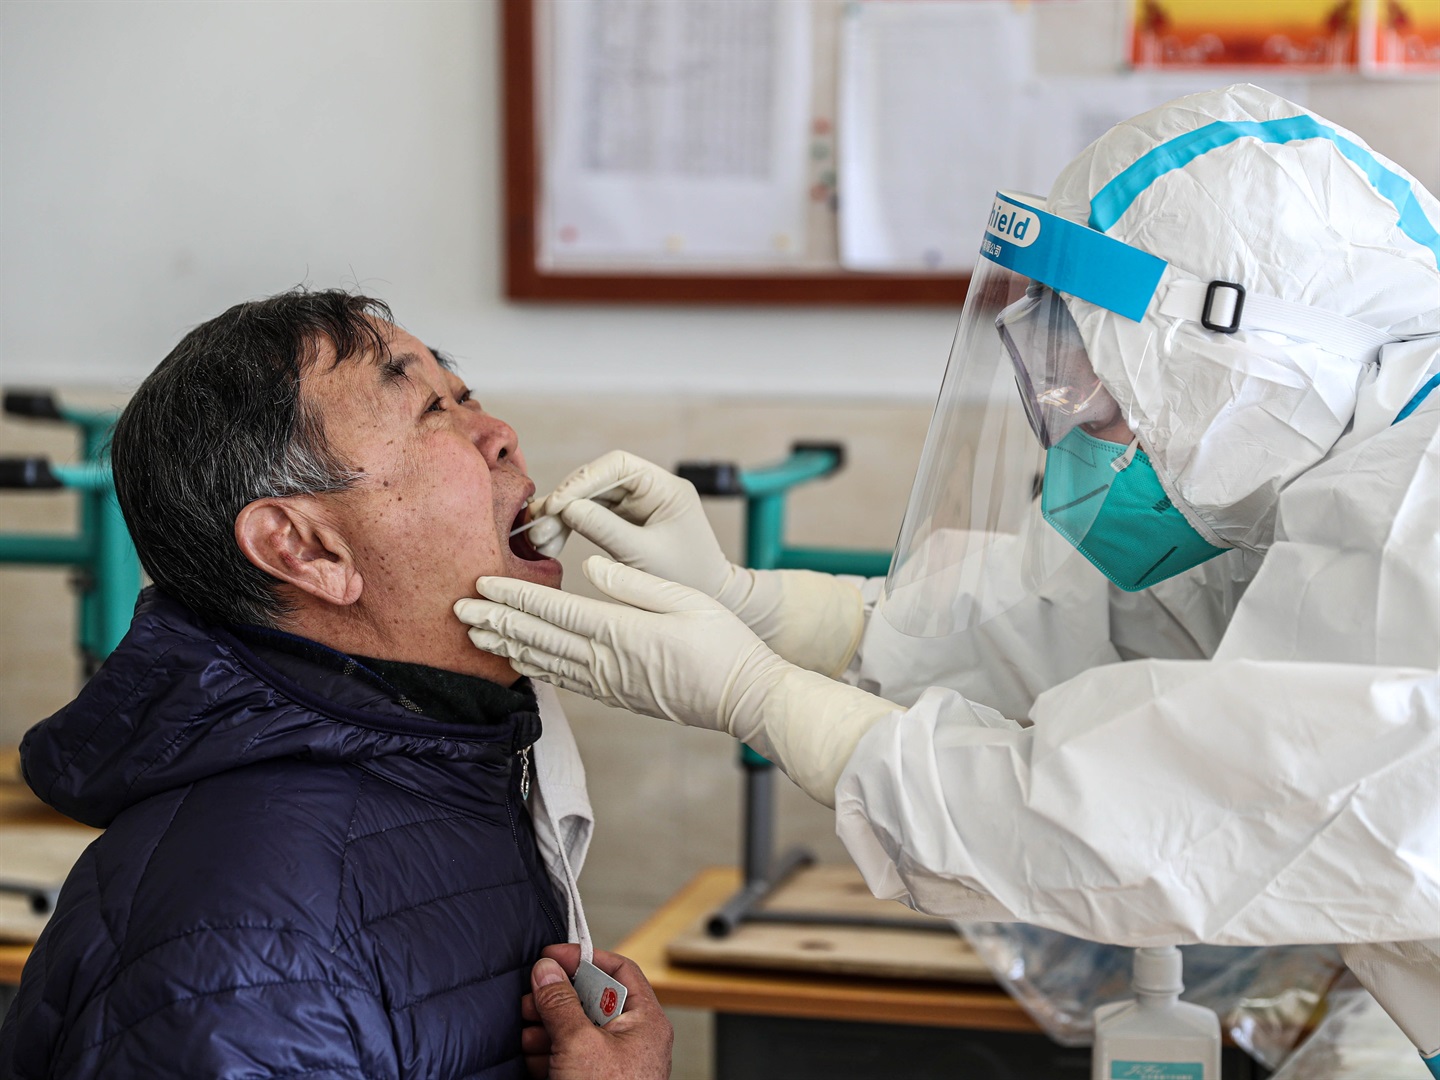 A medical worker takes a swab sample from a patient.